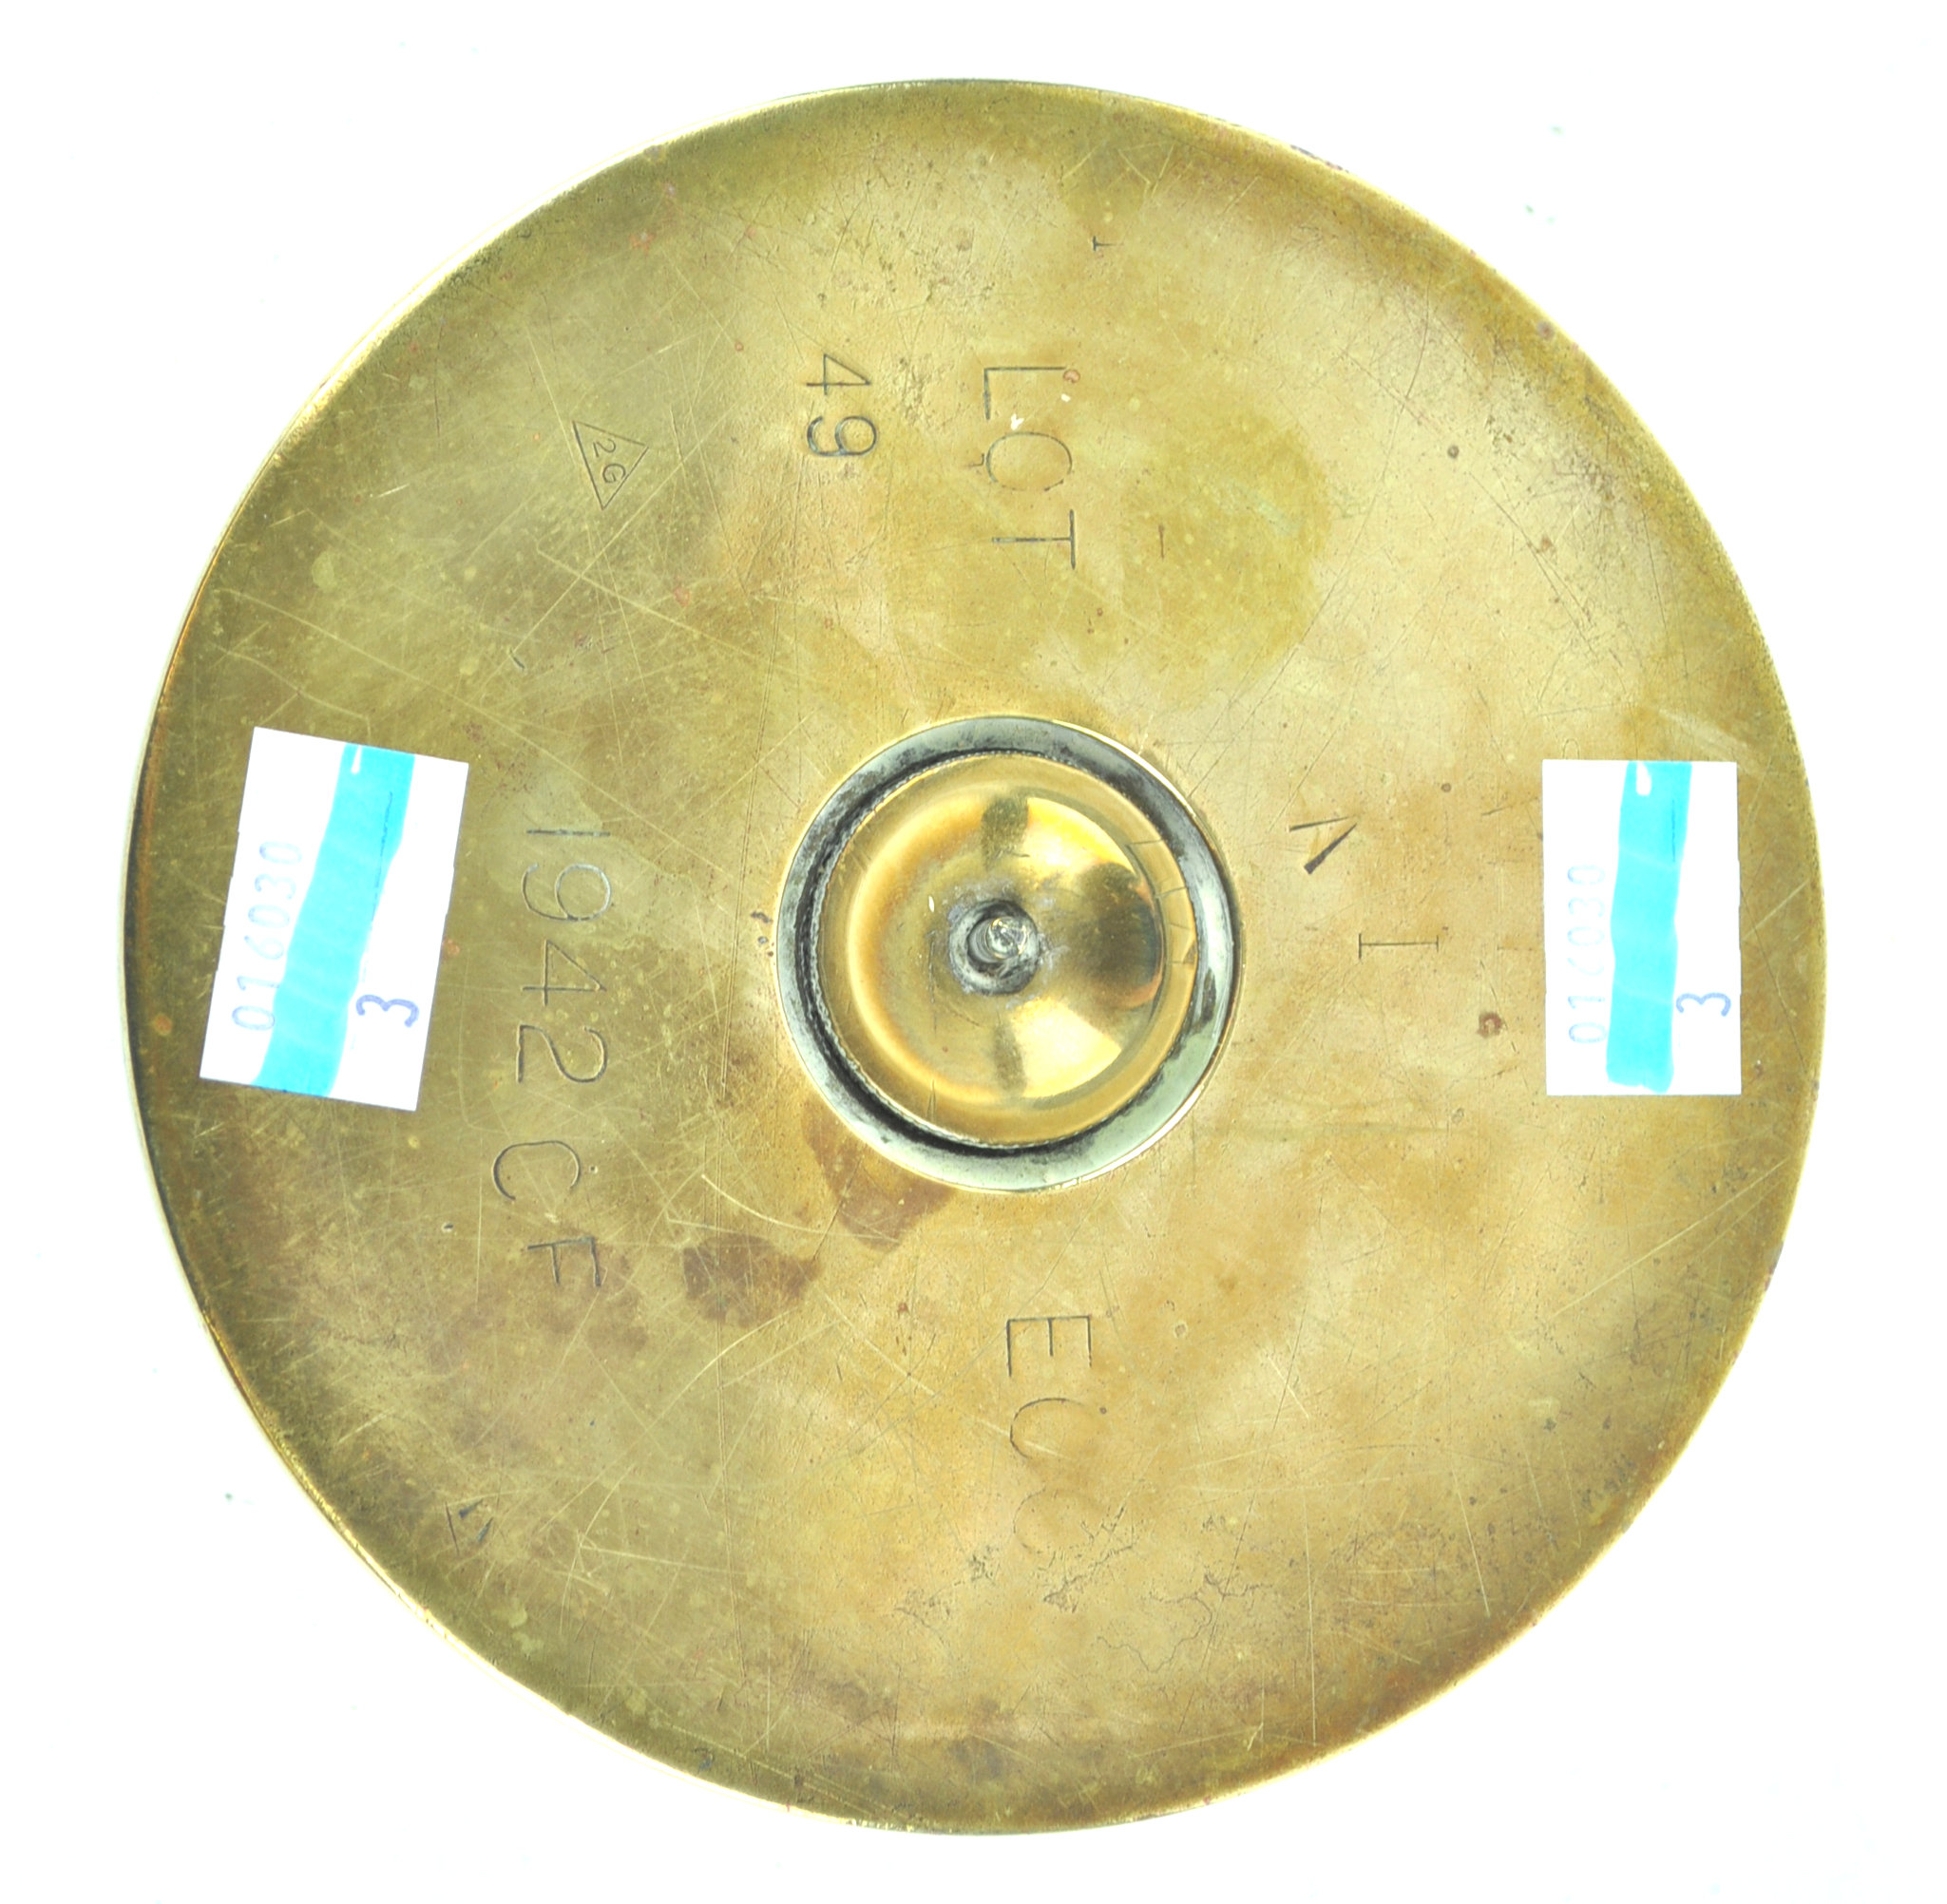 A 1942 trench art ashtray, constructed from the base of a shell case with bullet head decoration, - Image 3 of 3